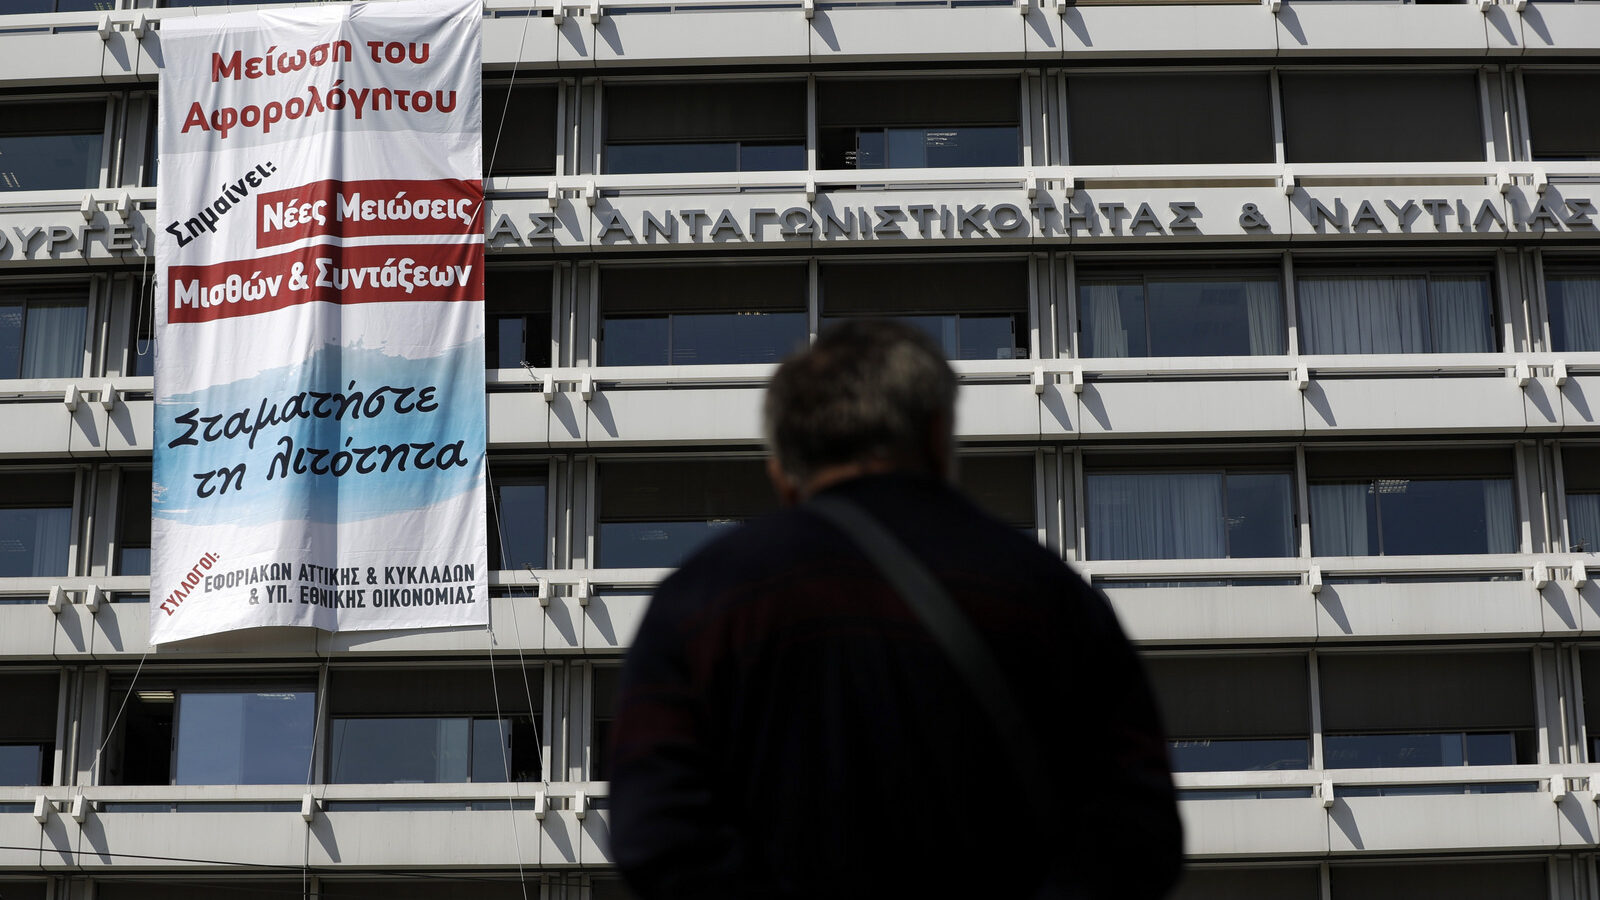 Protesting tax office workers hang a banner from the finance ministry in Athens on Monday, March 20, 2017, that reads: "Reduction of tax free limit means new cuts to salaries and pensions. Stop Austerity." Greece's left-led government is in negotiations with bailout creditors on further budget cuts and reforms required for the release of a new rescue loan installment. (AP/Thanassis Stavrakis)